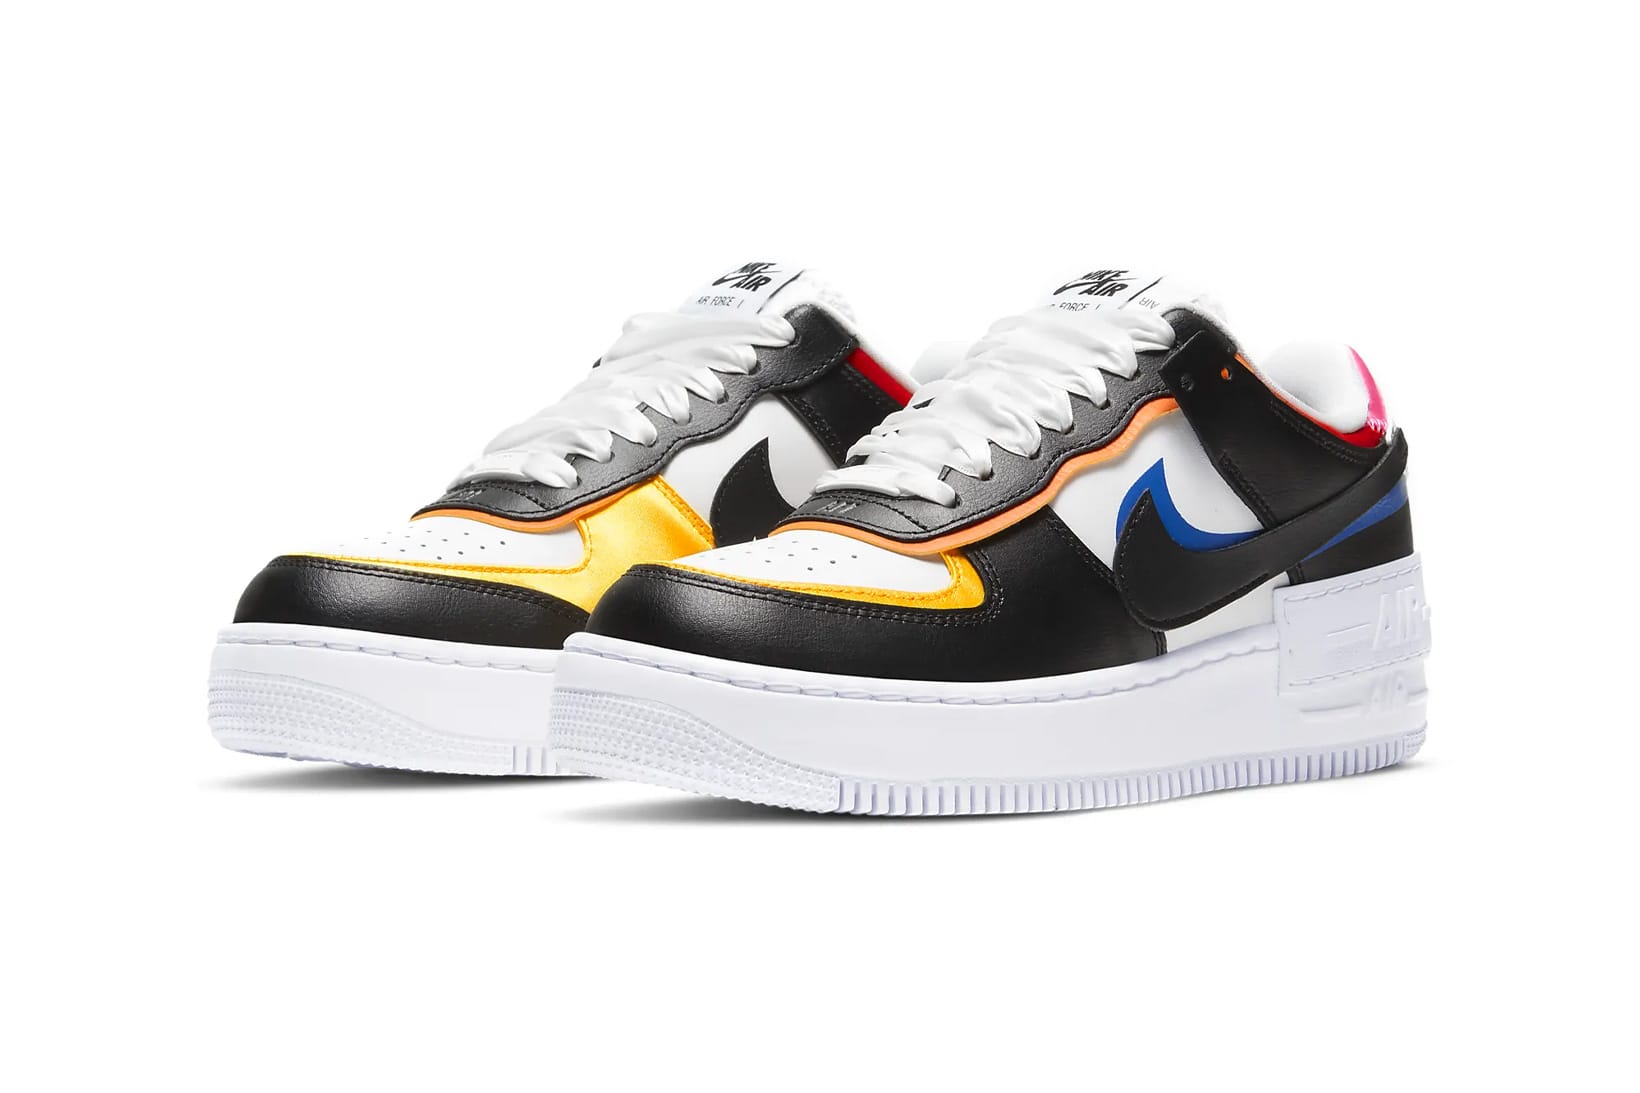 black yellow and orange air force 1